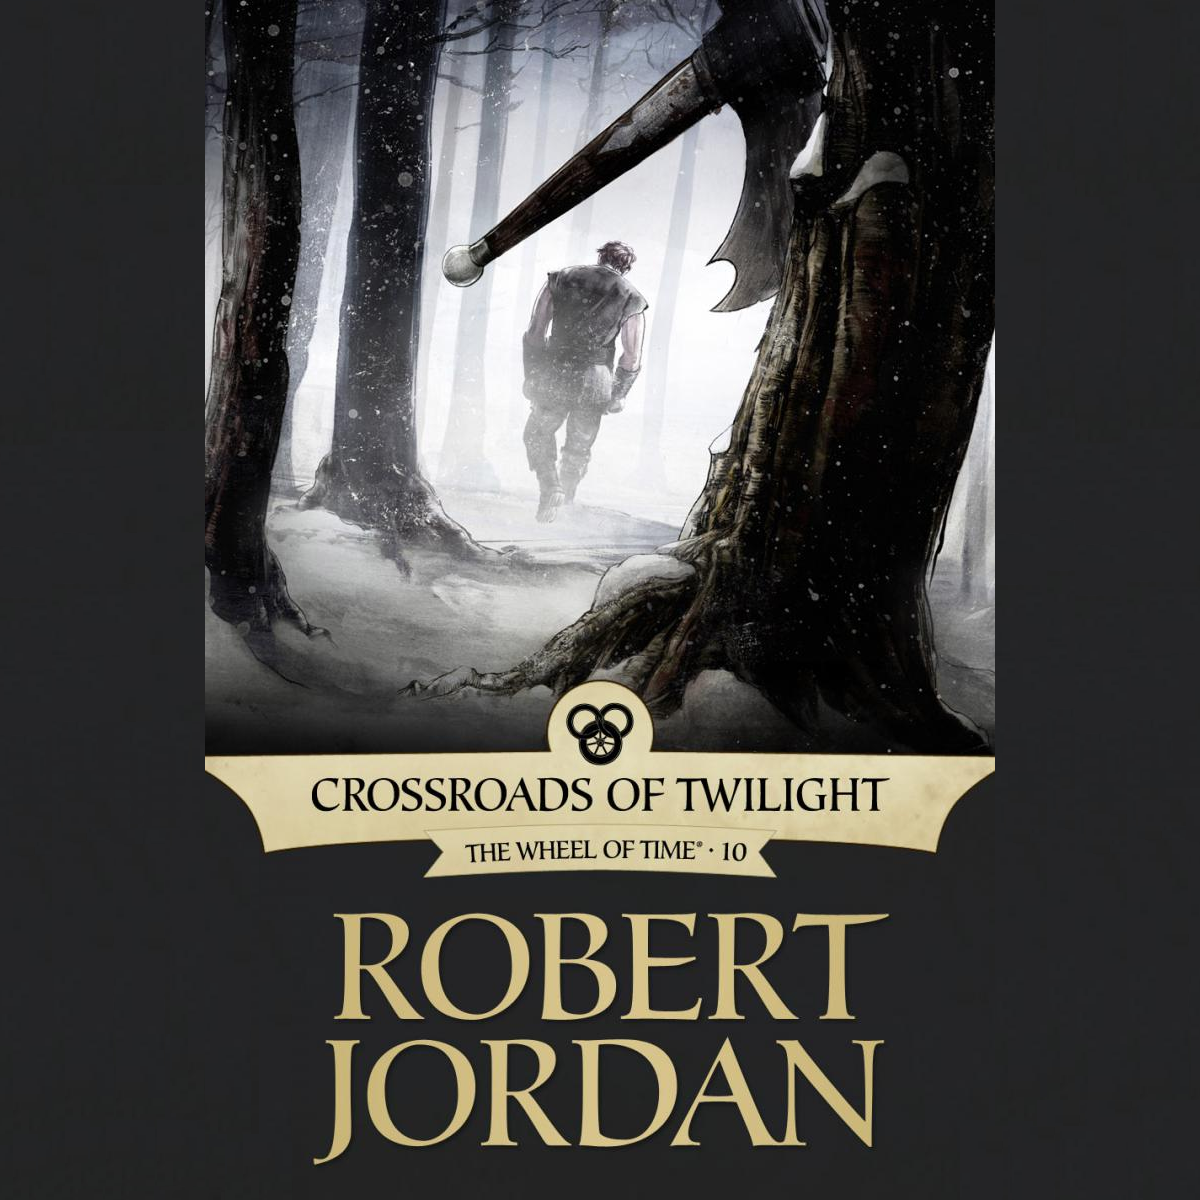 The Wheel Of Time #10: Crossroads Of Twilight